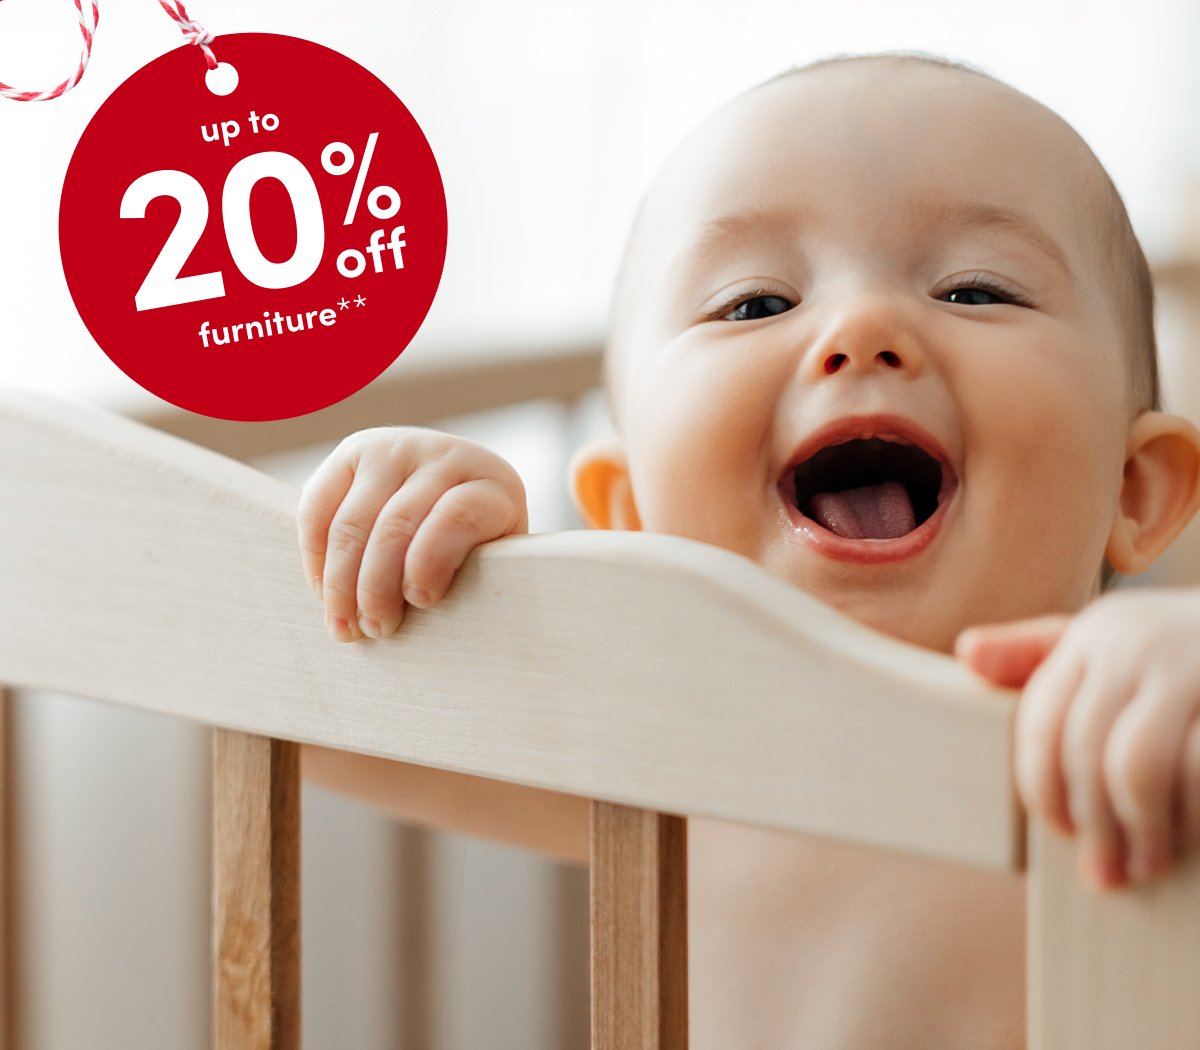 up to 20% off furniture**